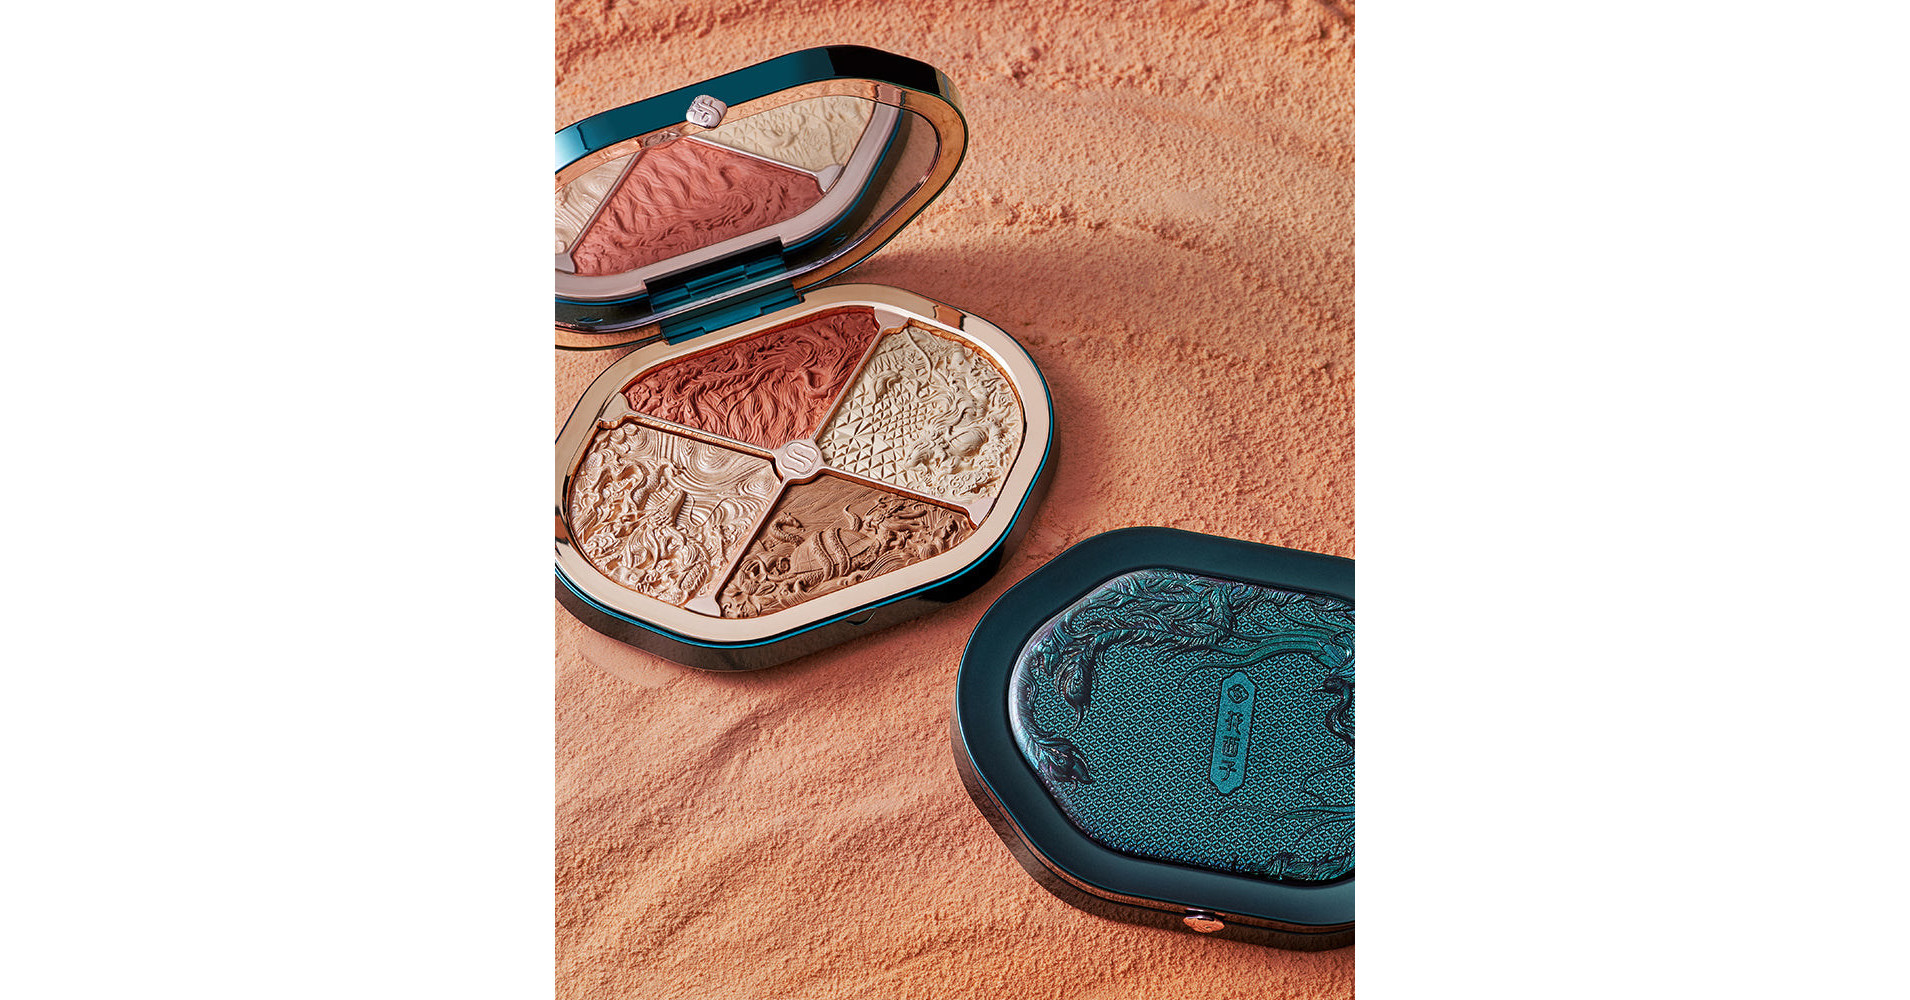 C-Beauty Brand Florasis Launches Eastern Beasts Sculpting Makeup Palette